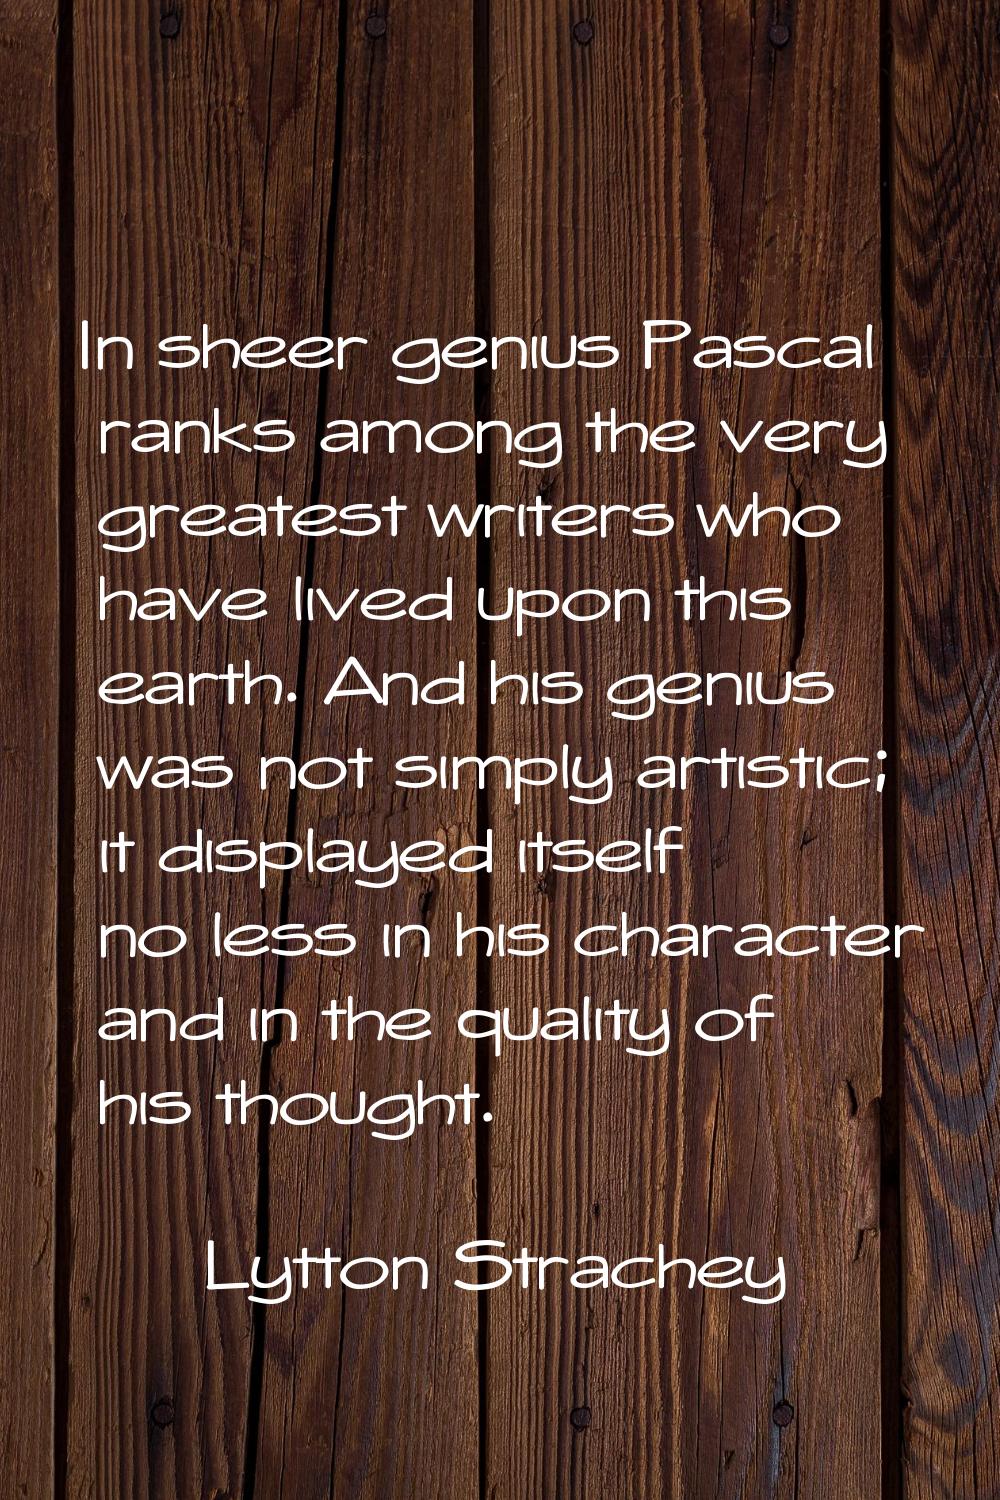 In sheer genius Pascal ranks among the very greatest writers who have lived upon this earth. And hi